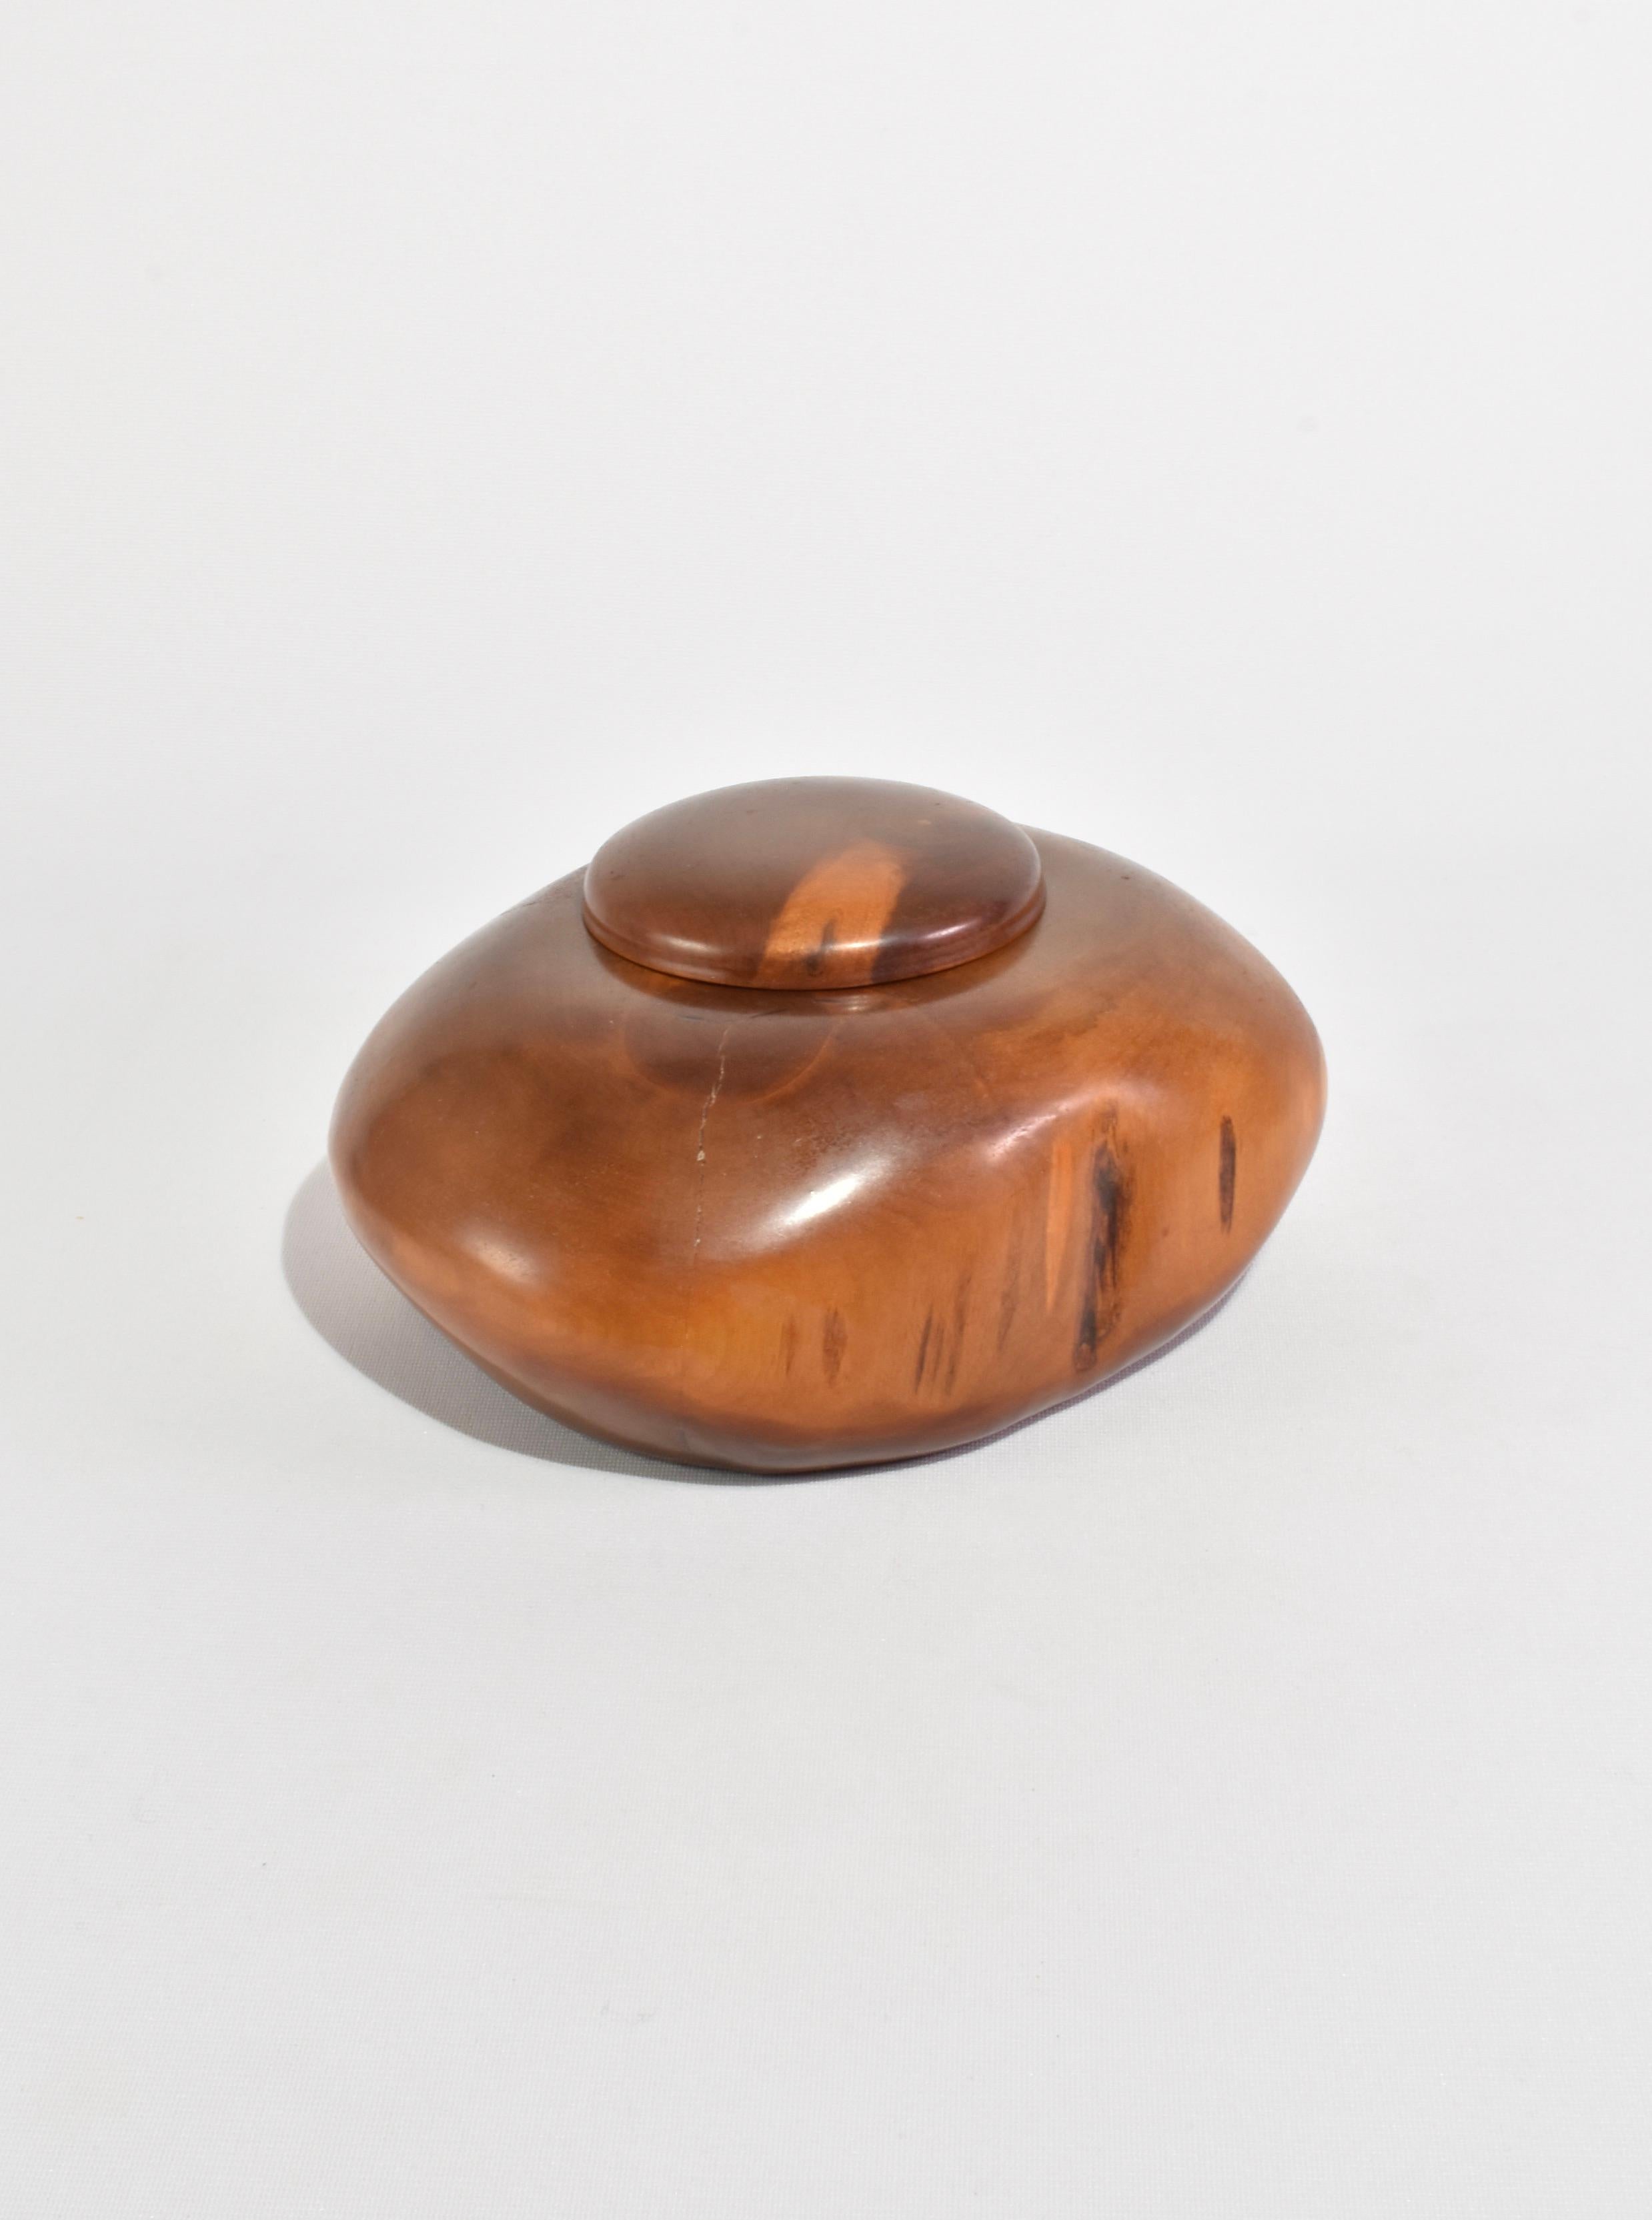 Hand-crafted wooden box in an organic round shape. 